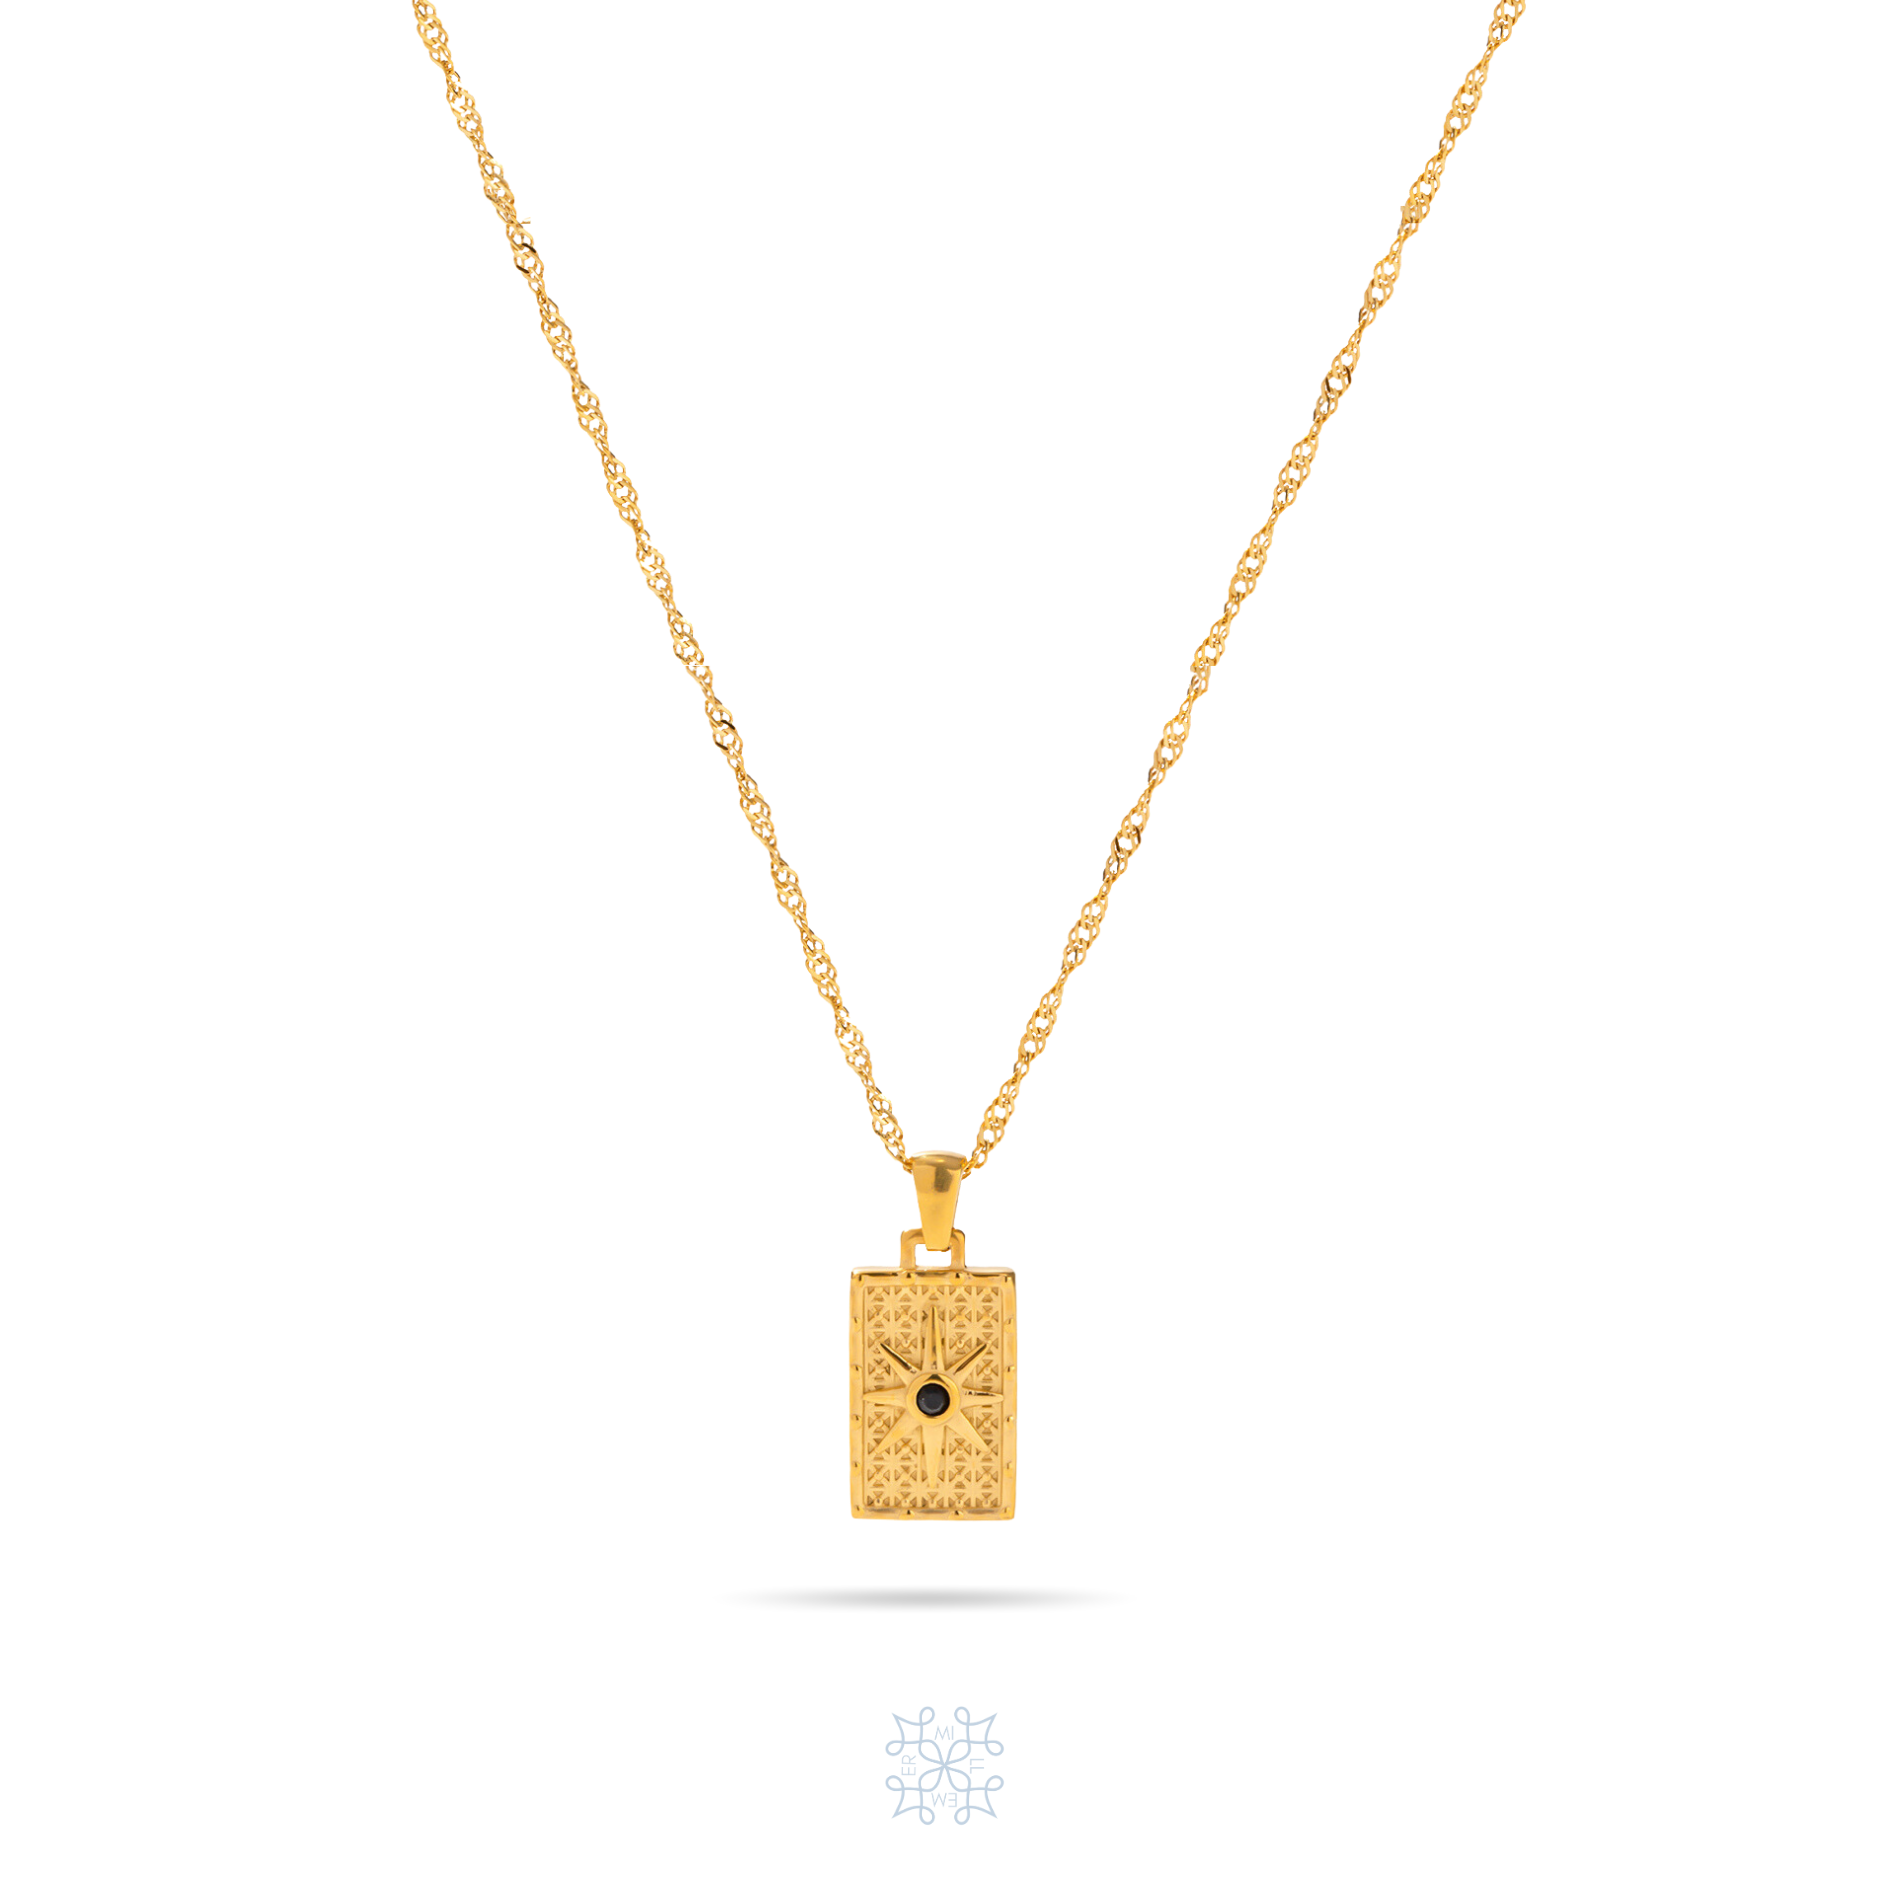 Rectangular compass Gold pendant. A star engraved in the top of the pendant with a black zircon in the middle. th ependant has the same design in both sides of ot. It has a long gold chain. COMPASS Rectangular Pendant Gold Necklace. 